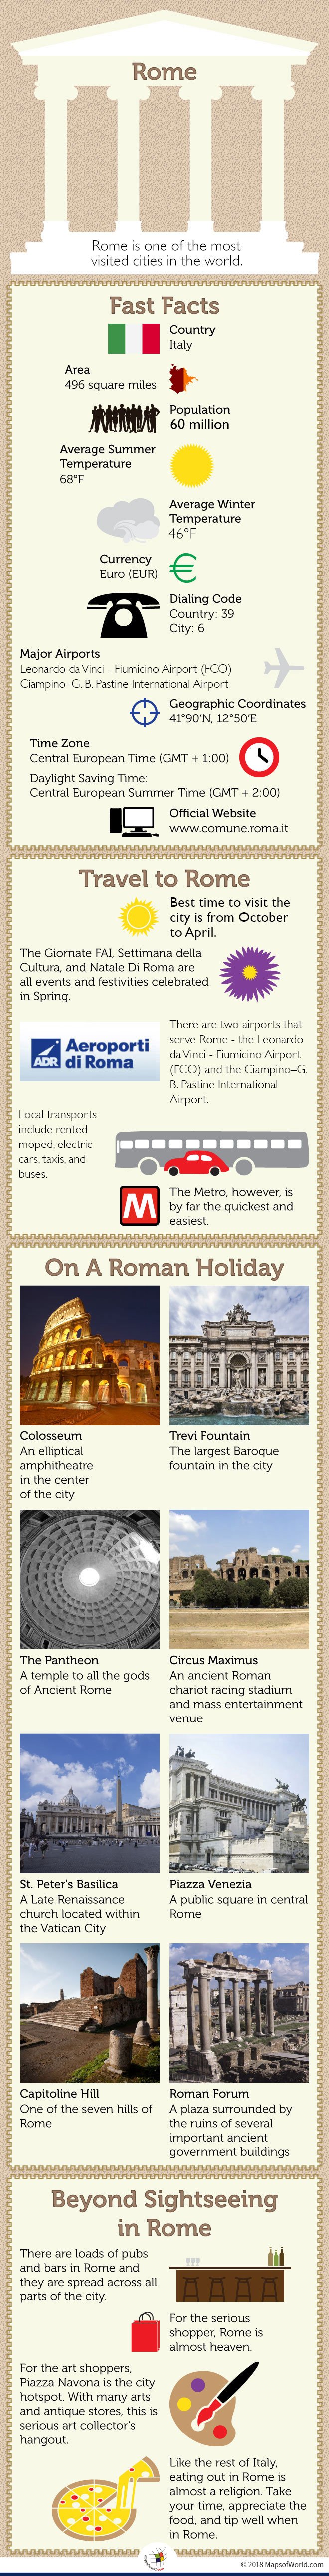 Infographic Stating Rome's Fast Facts